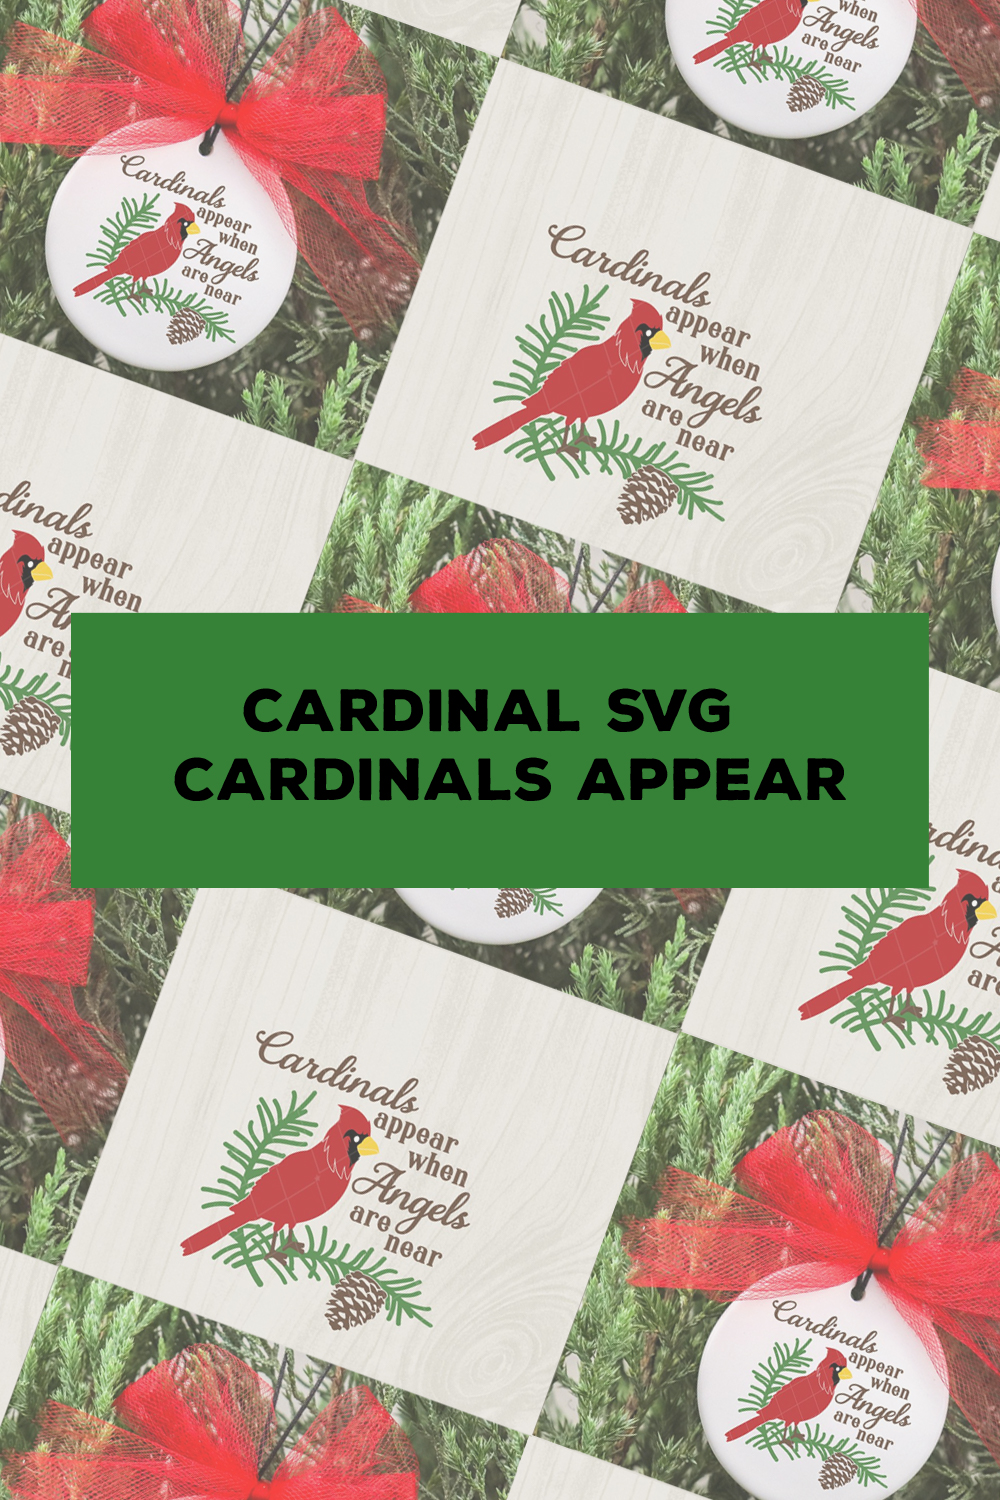 Cardinal ornament with a red bow on it.